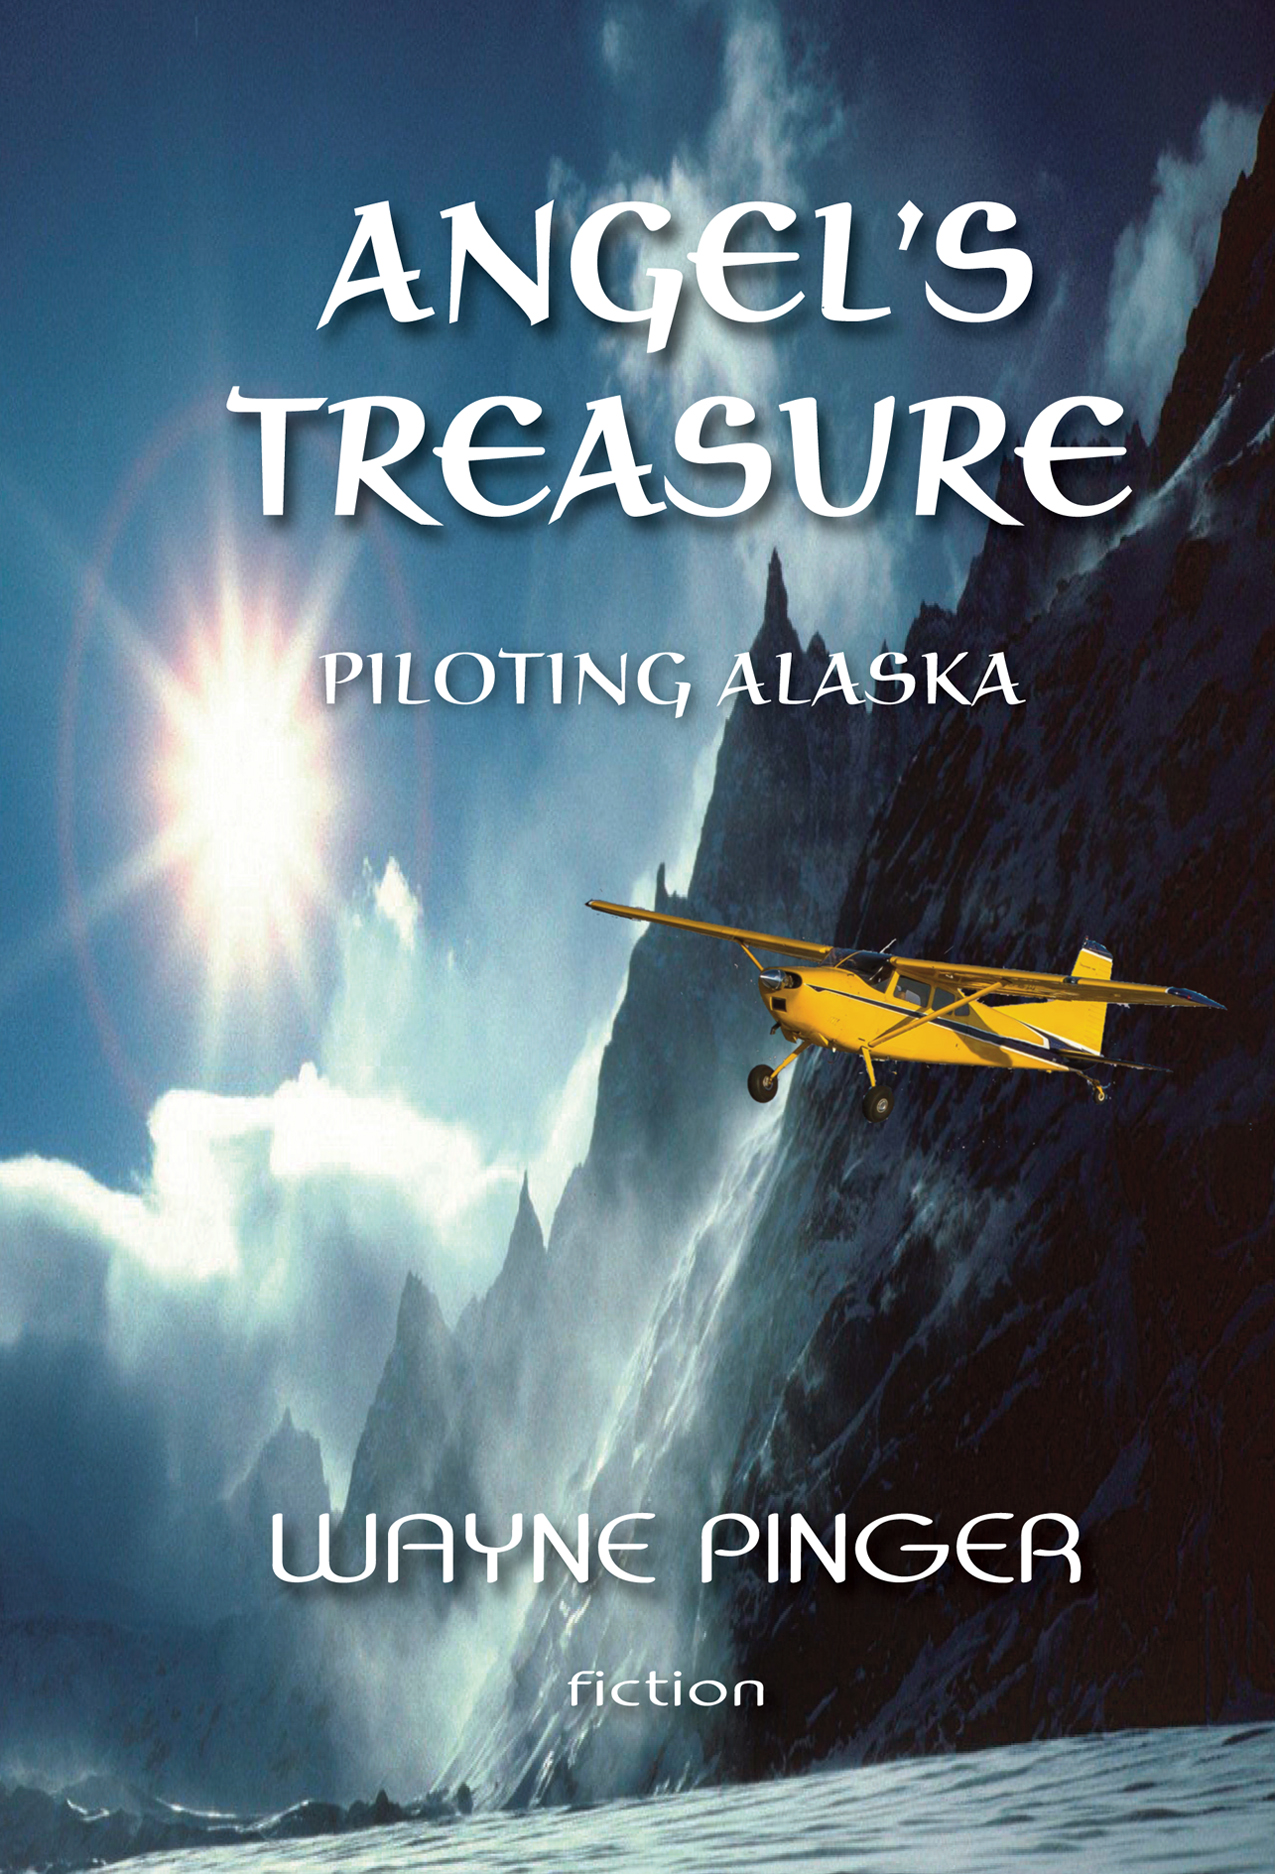 The Second in the Angels in Alaska Series by Wayne Pinger from Firefallmedia